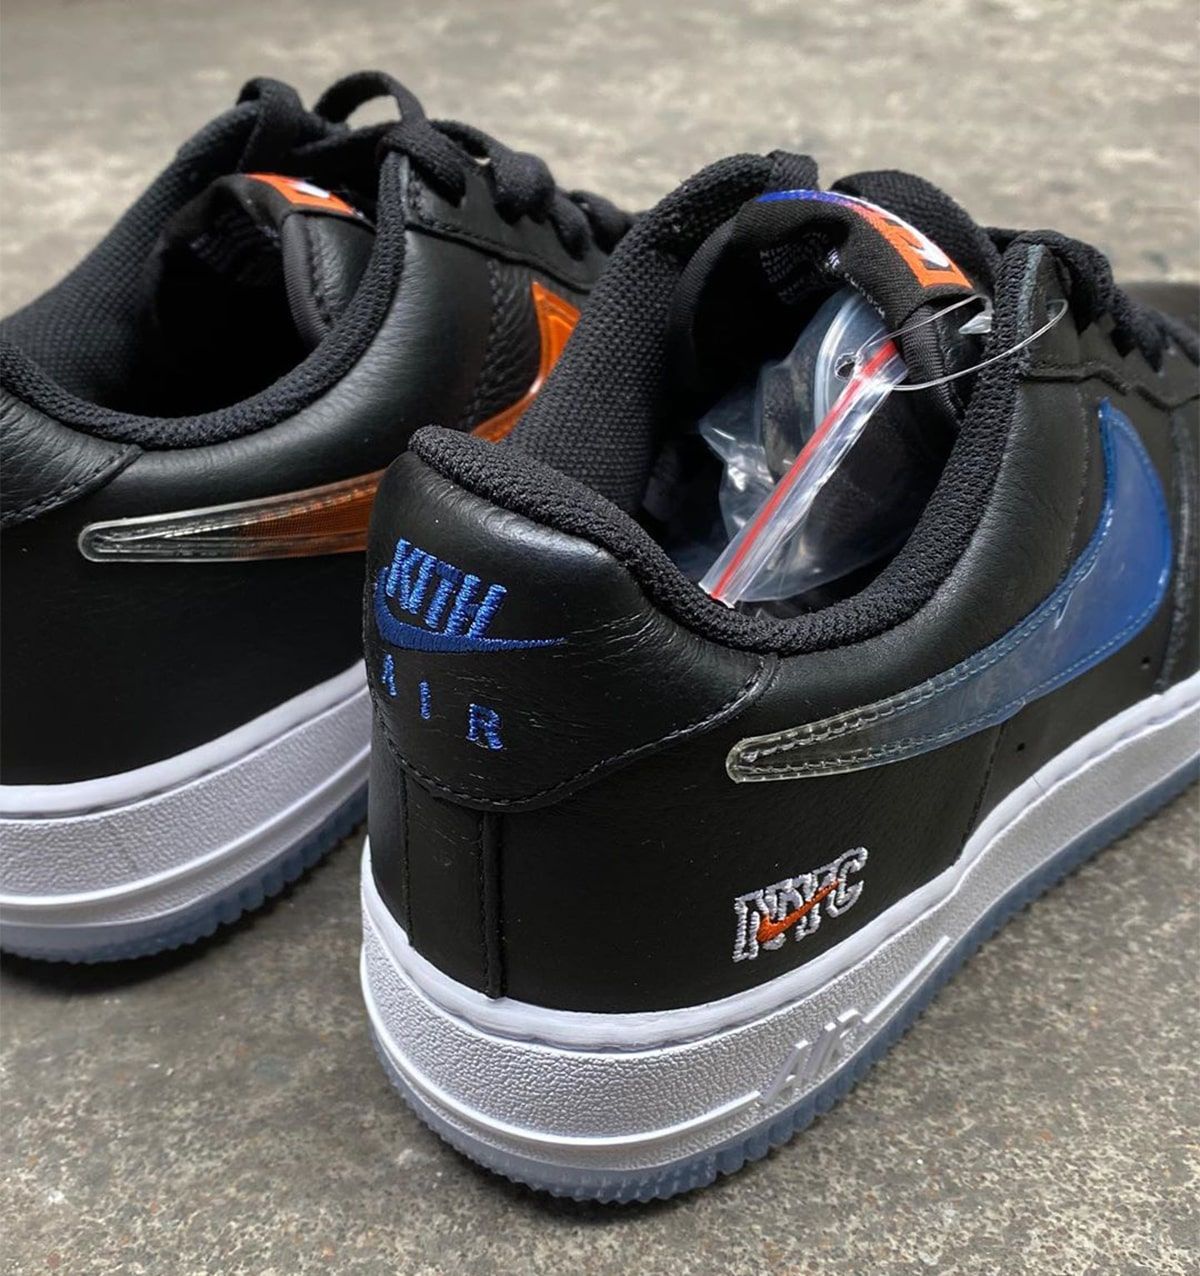 KITH x Nike Air Force 1 “NYC” Confirmed for Dec. 18th Drop | House of Heat°